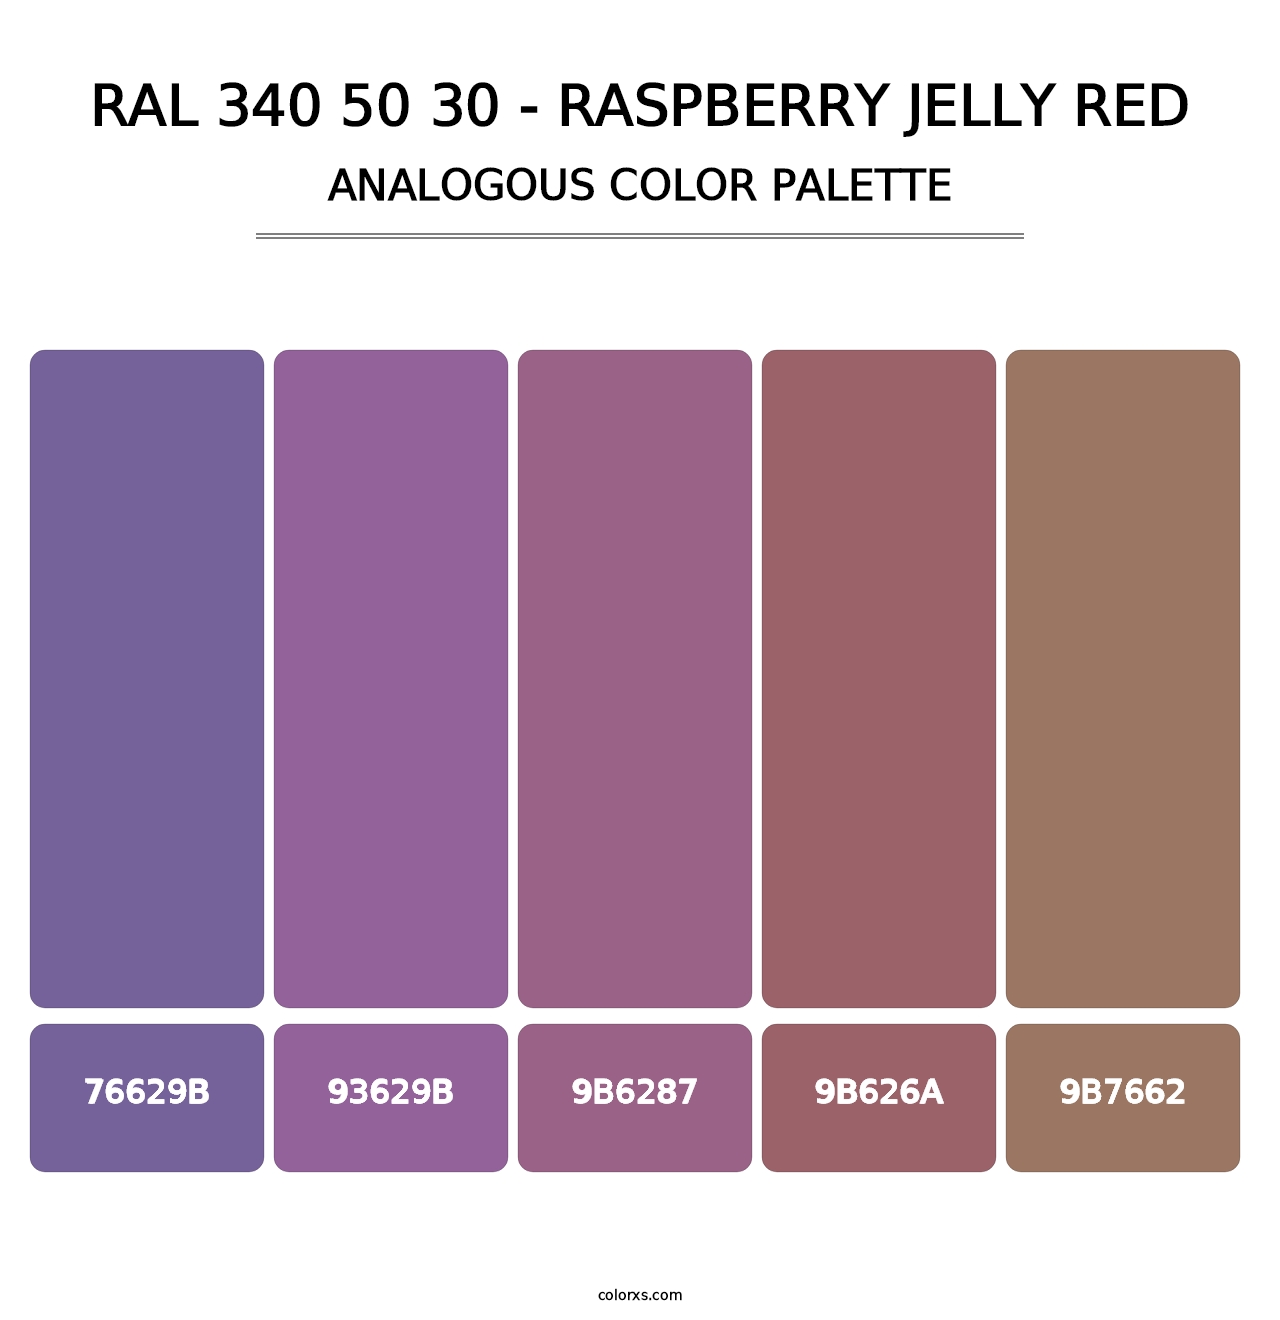 RAL 340 50 30 - Raspberry Jelly Red - Analogous Color Palette